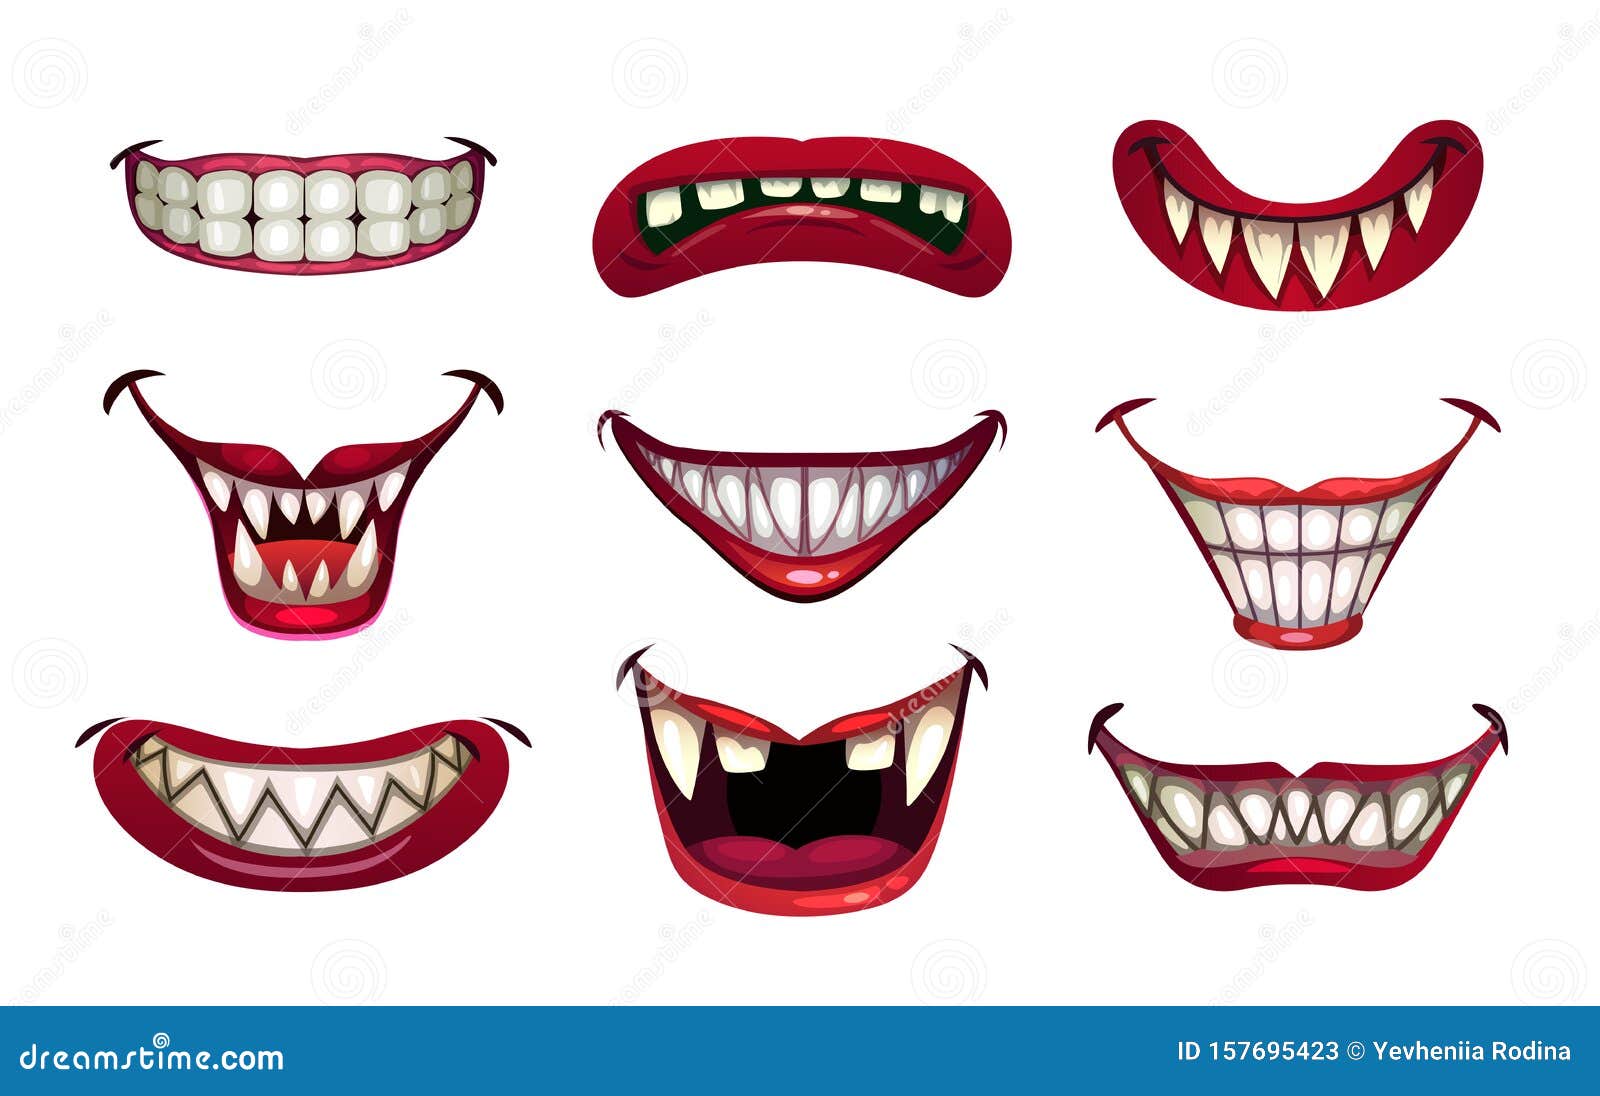 creepy clown mouths set. scary smile with jaws and red lips.